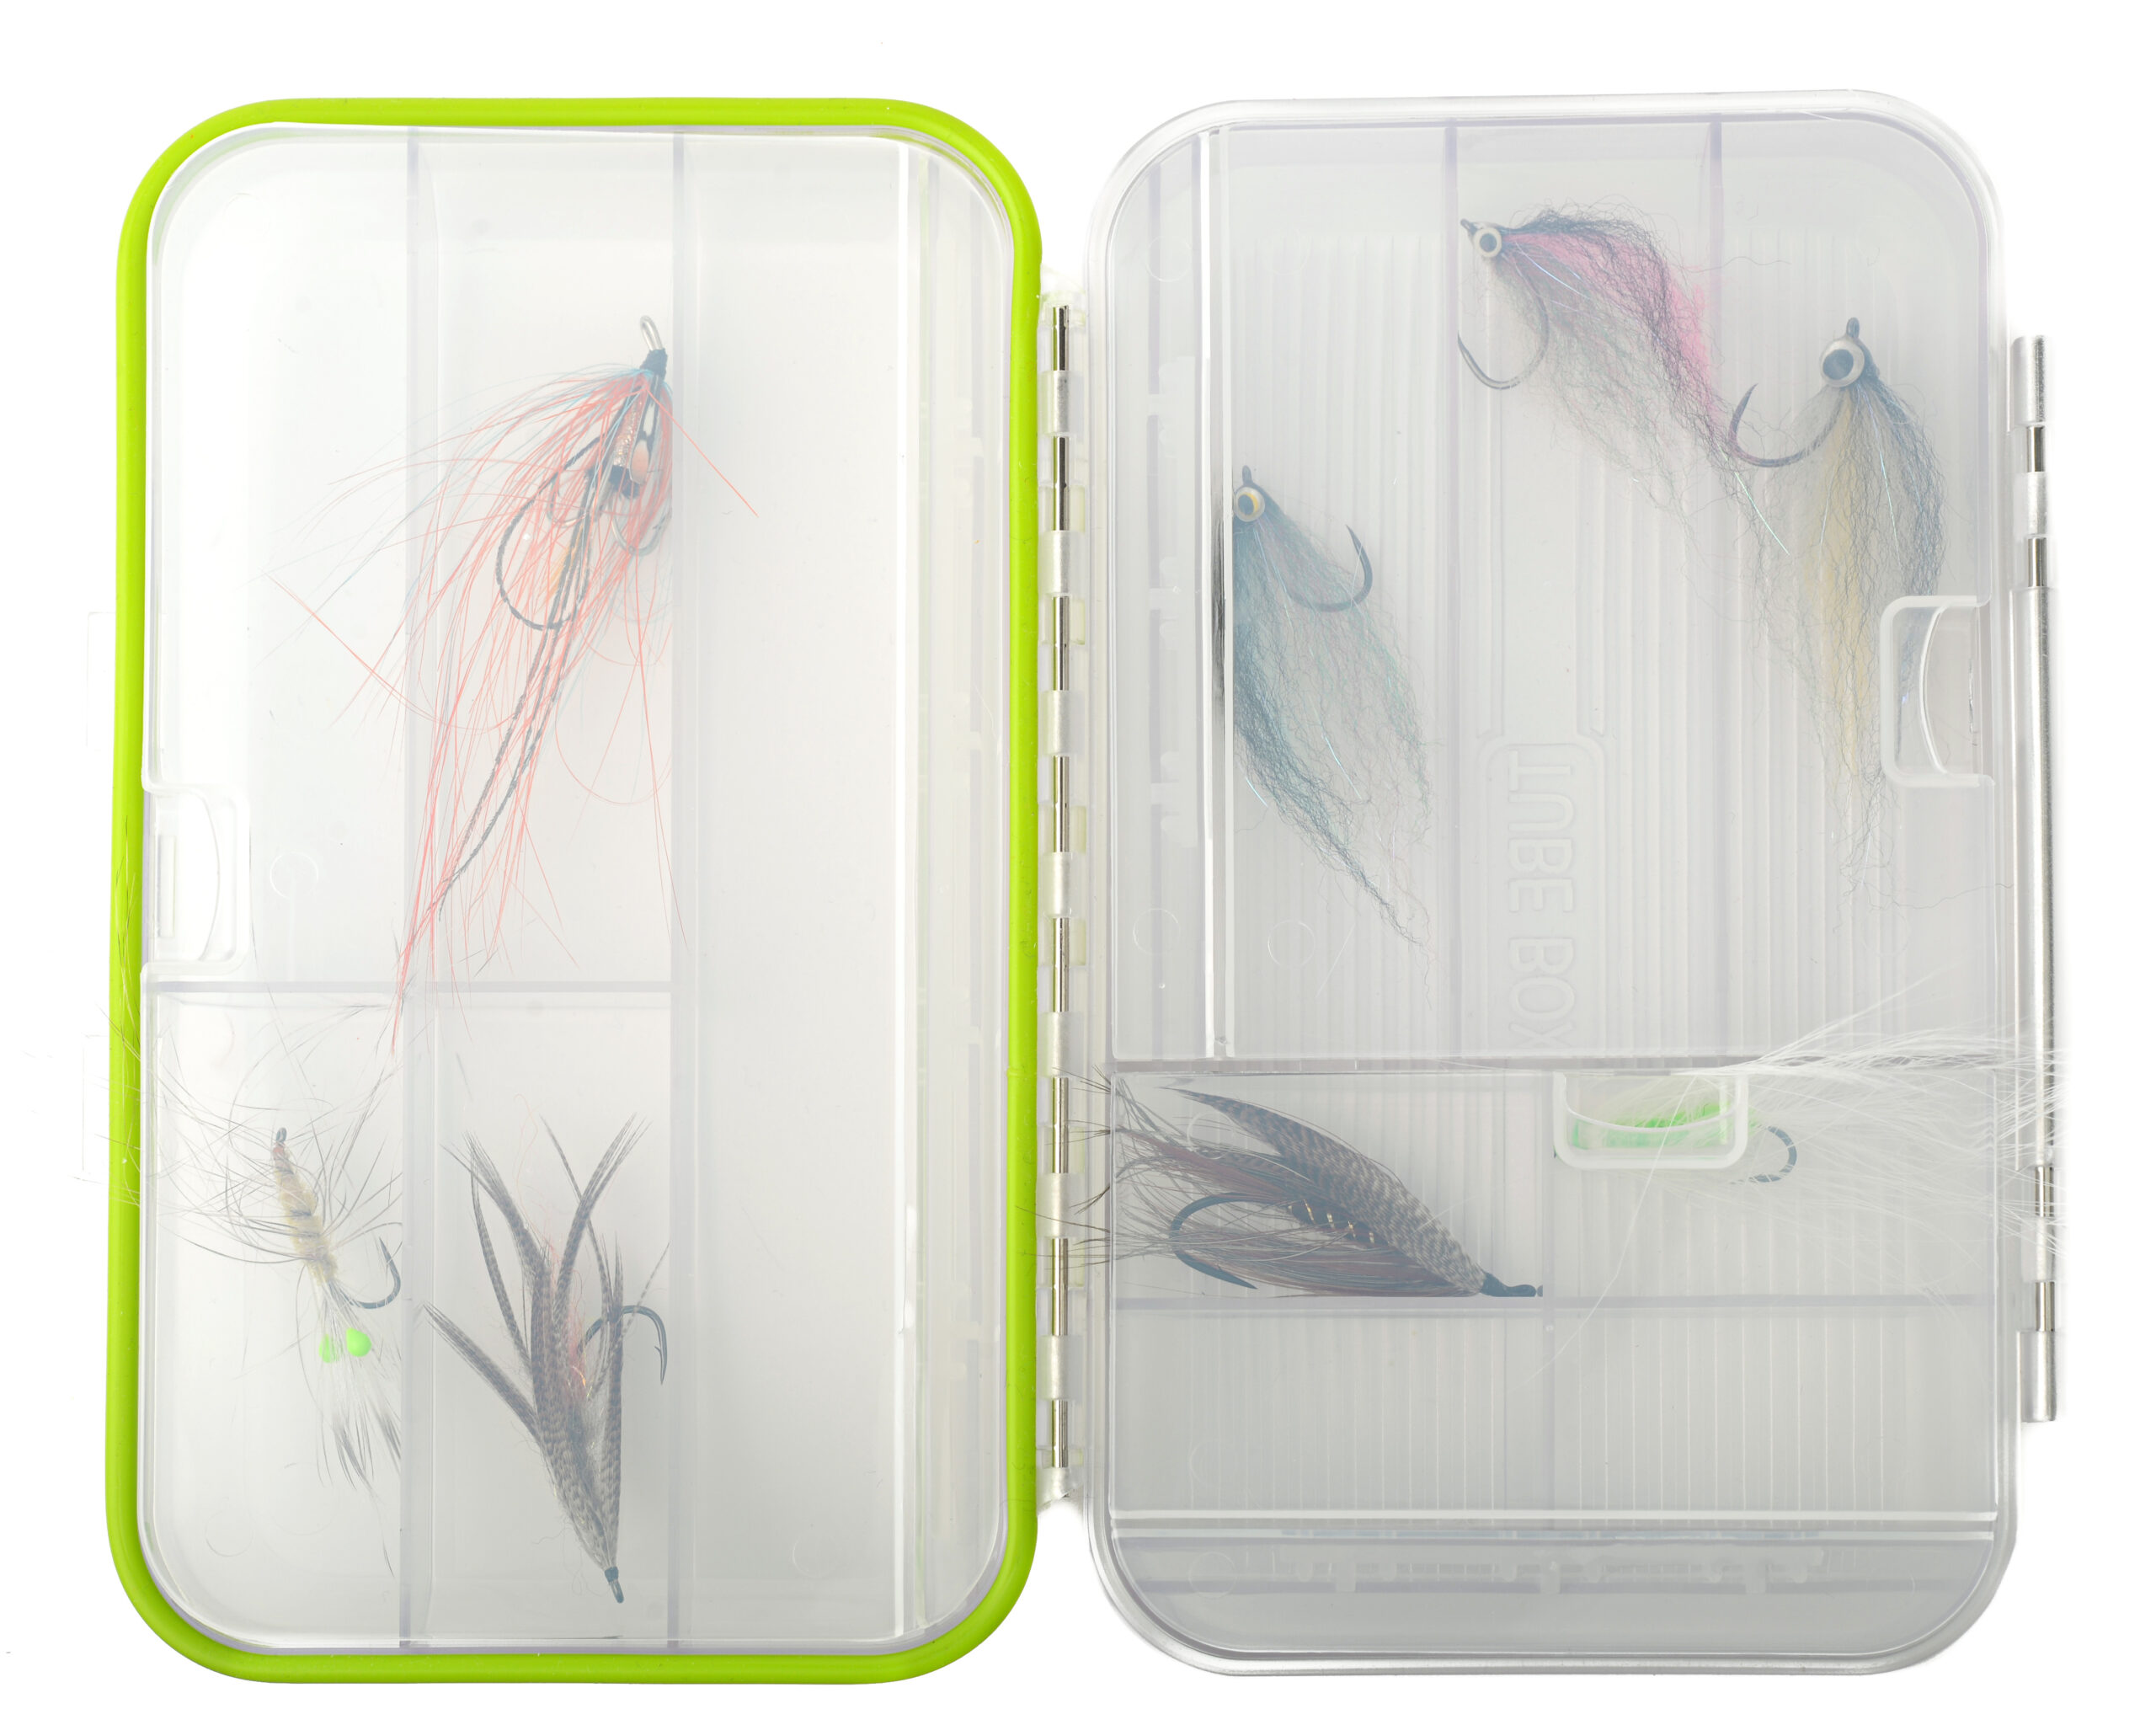 3 Compartment Large Fly Box for Large Flies - Sunray - Sunray Fly Fish